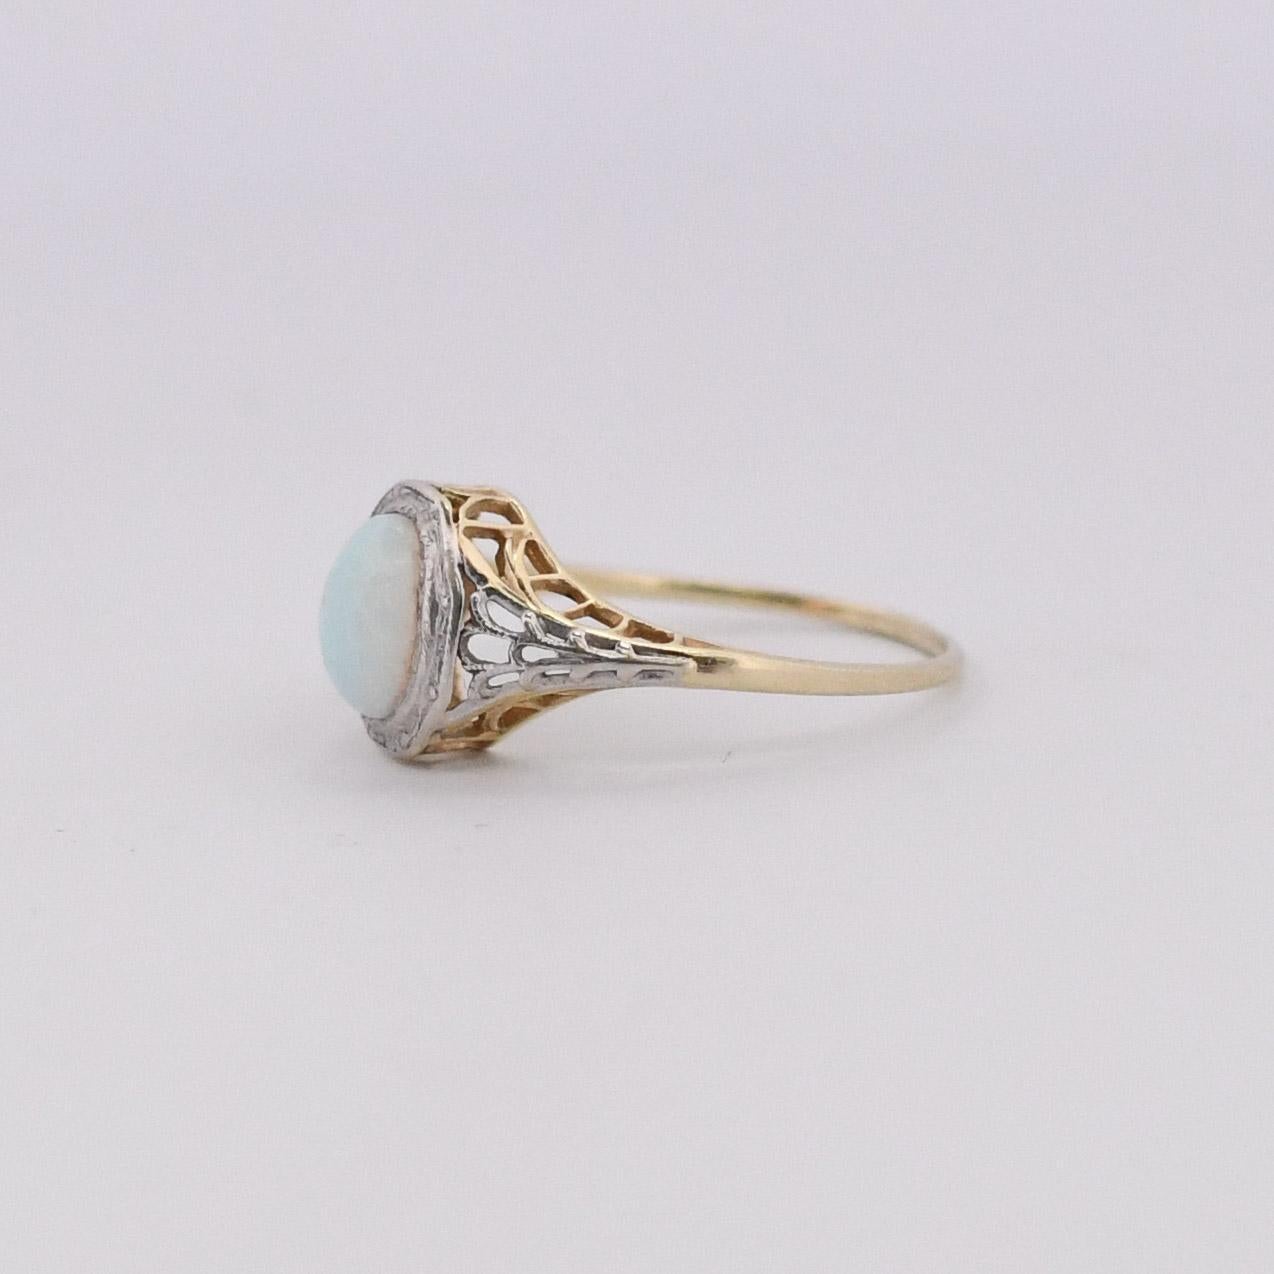 Oval Cut Opal Filigree Ring 14K Yellow Gold With Platinum Top For Sale